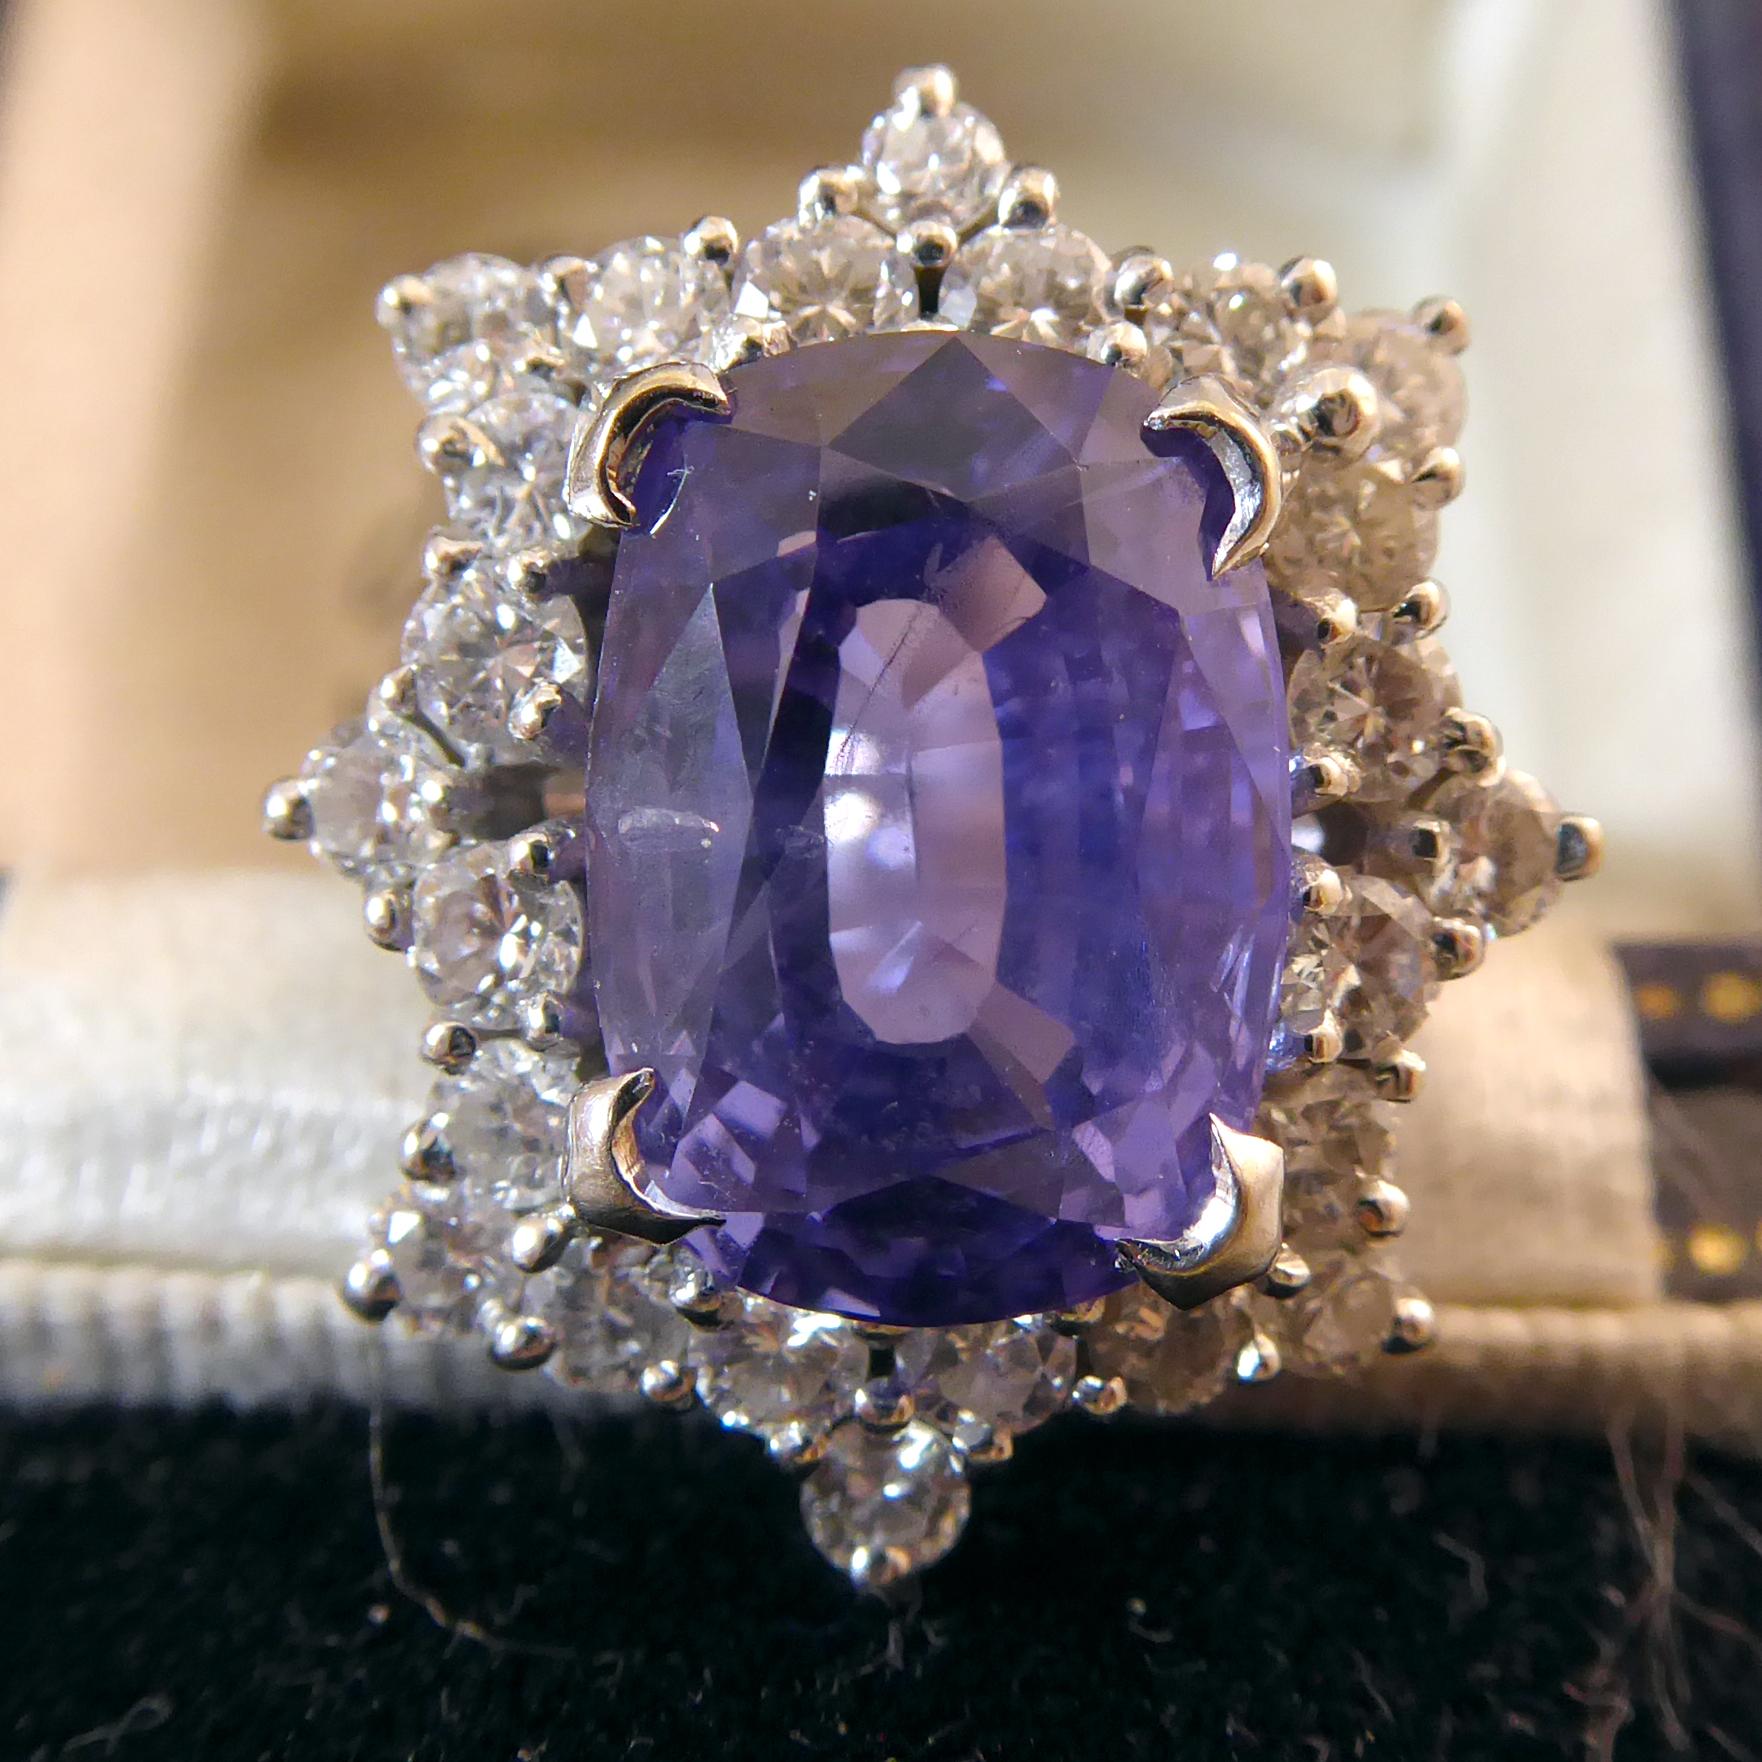 Women's or Men's 5.0 Carat Purple Sapphire and Diamond Ring, 1970s Vintage Cluster Style